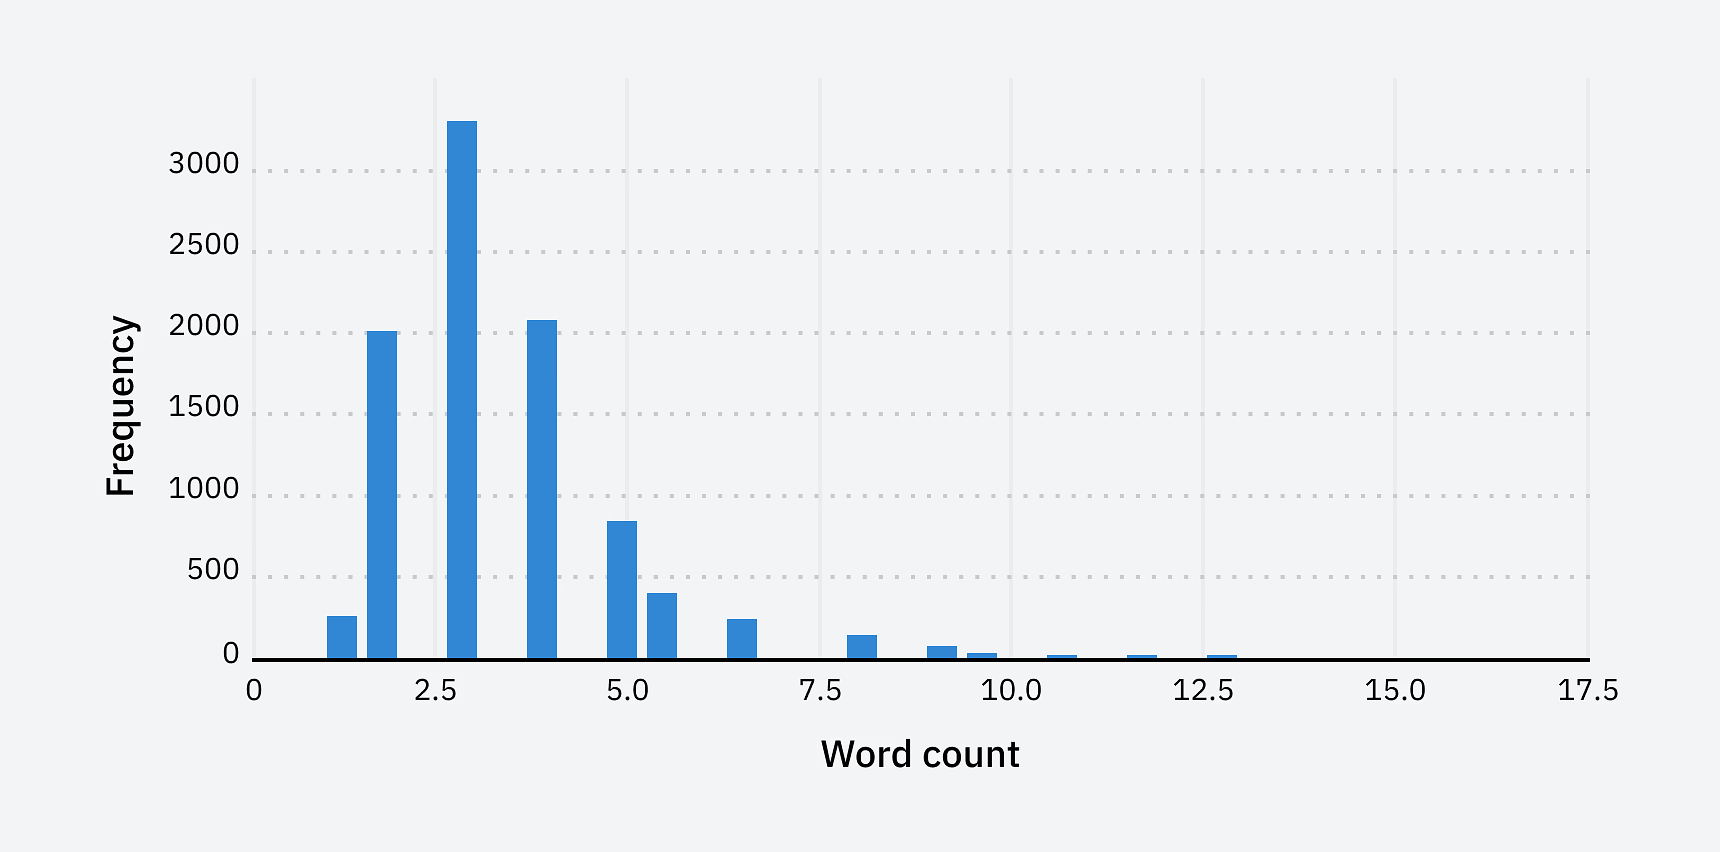 Word count histogram for multiple rankings. 